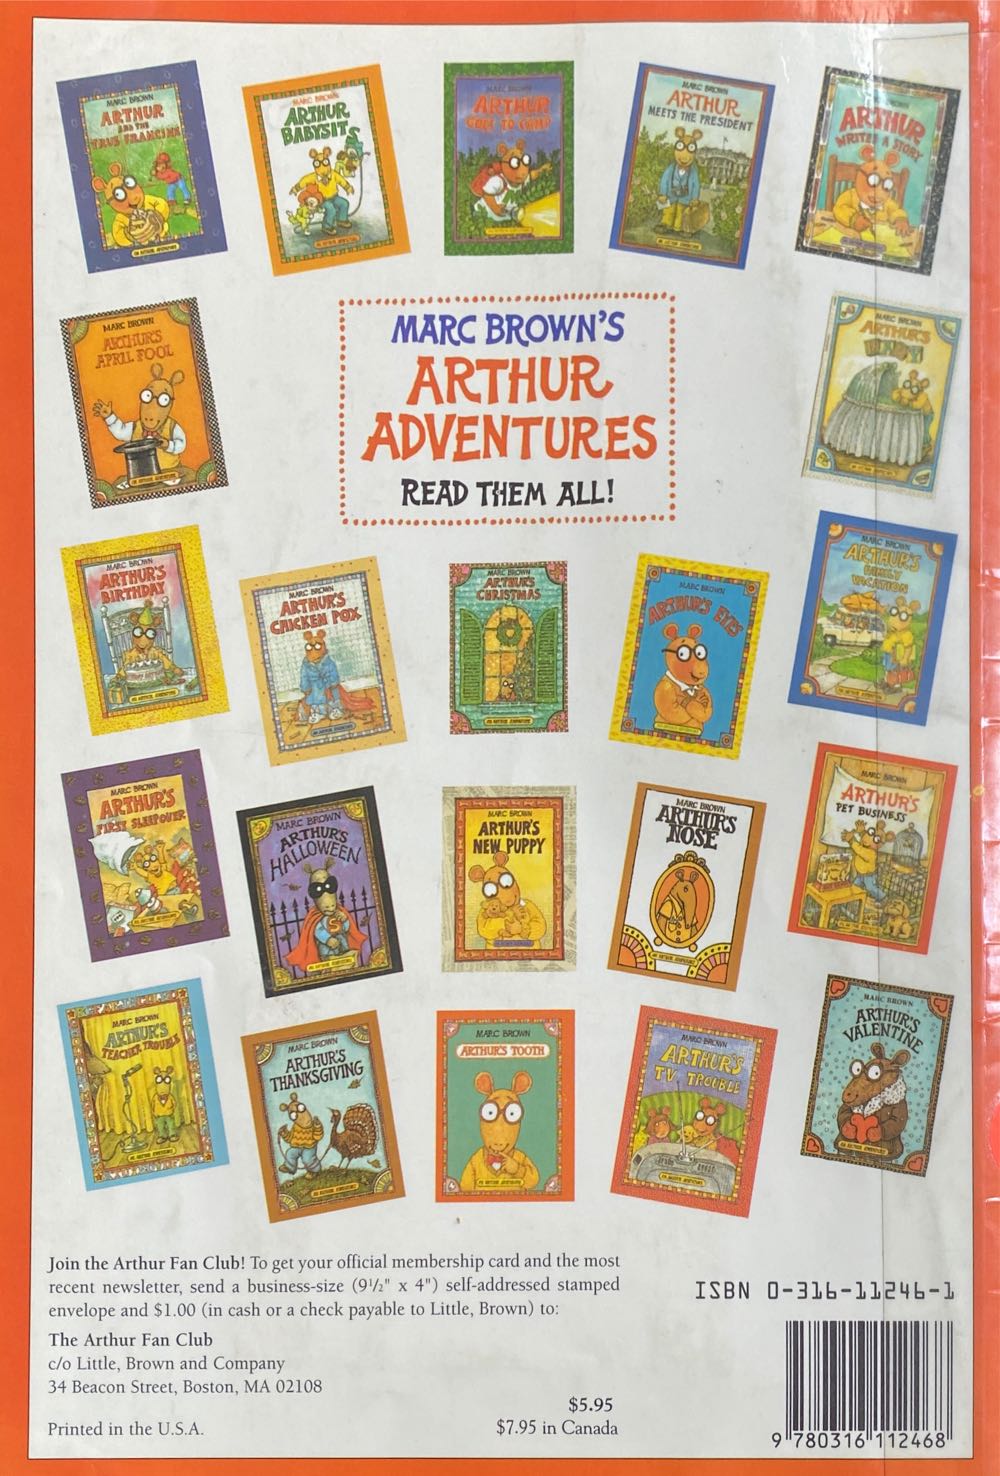 Arthur’s Tooth - Marc Brown (Little, Brown and Company - Paperback) book collectible [Barcode 9780316112468] - Main Image 2